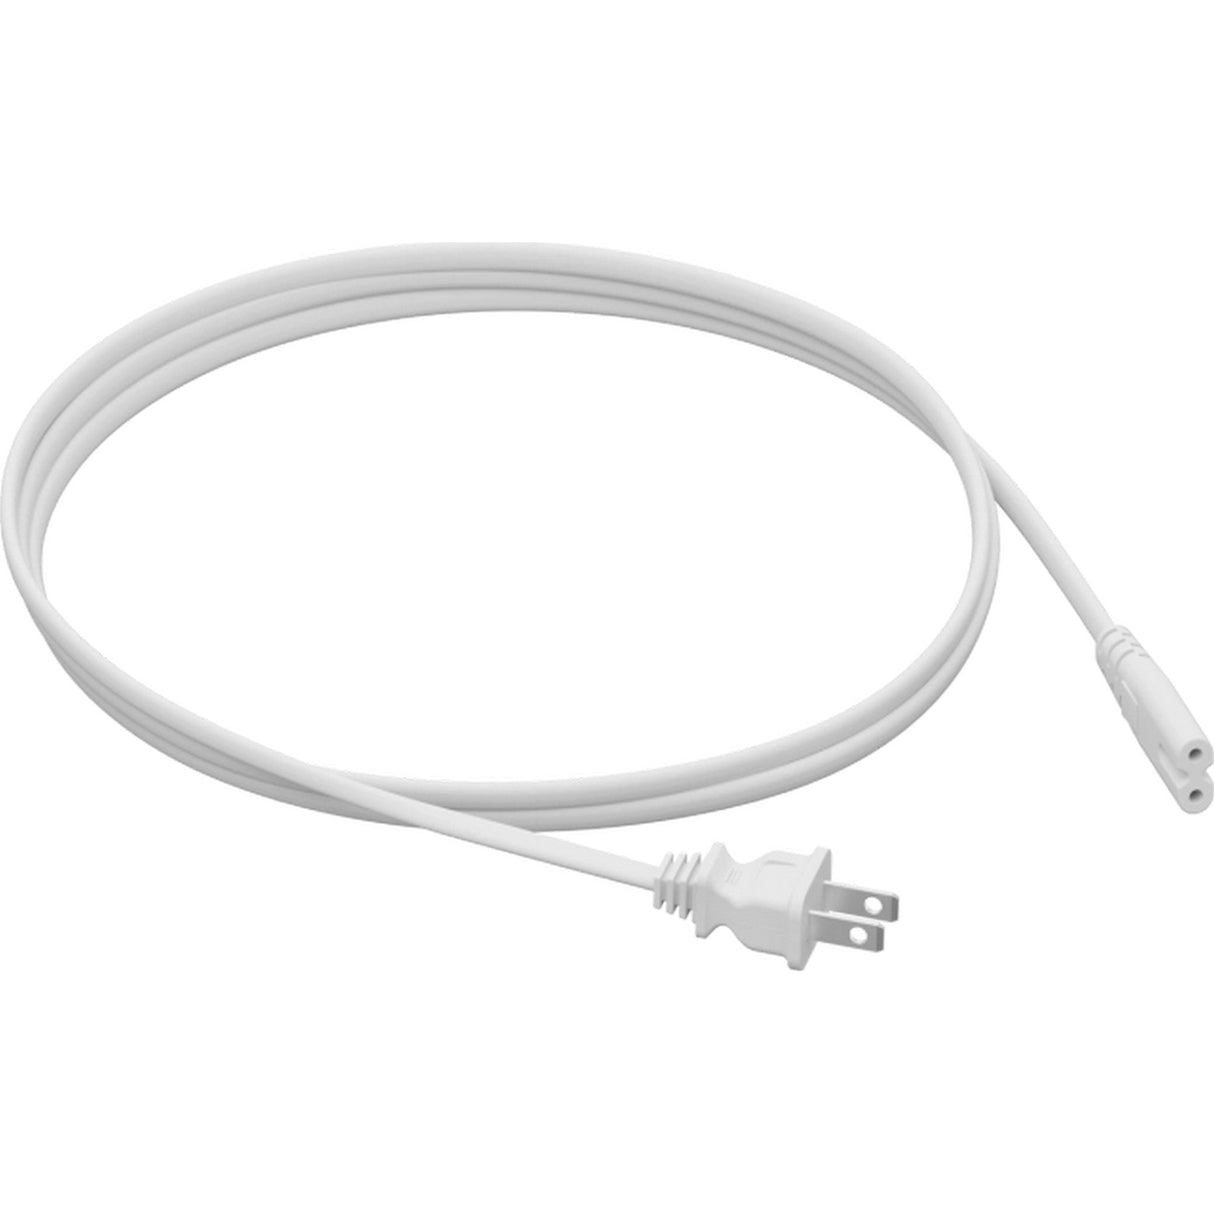 Sonos Power Cord III for Arc, Amp, Beam, Ray Speakers